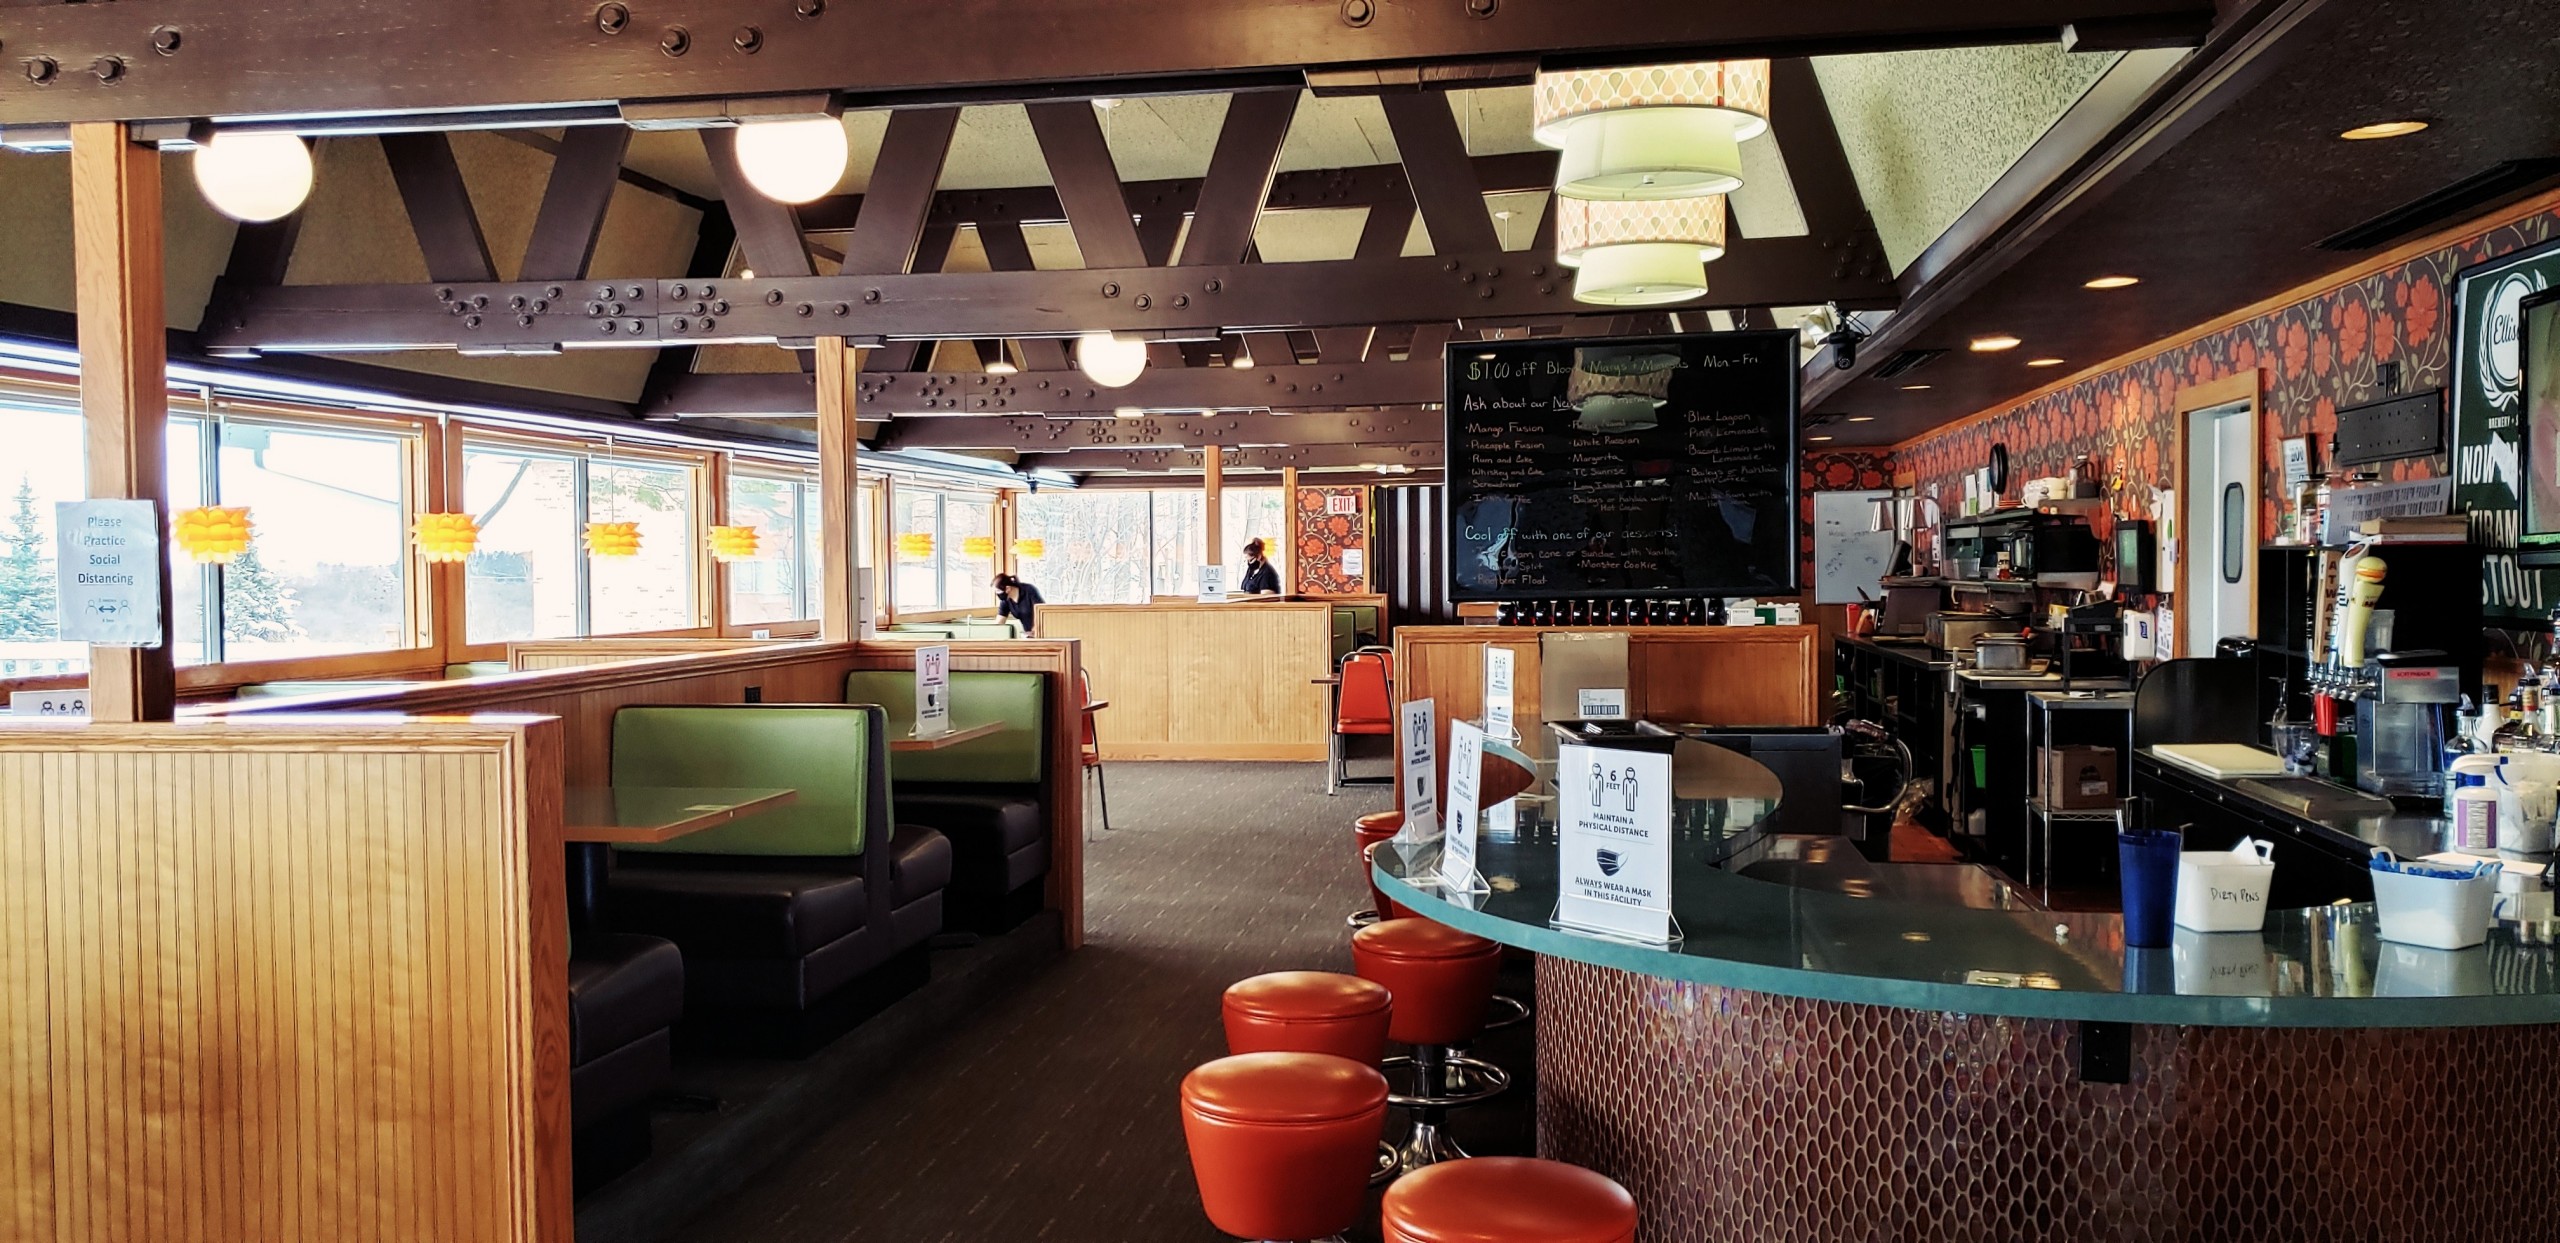 Promo Image: GTPulse: Cheap Brunch in Retro Digs at This Traverse City Restaurant